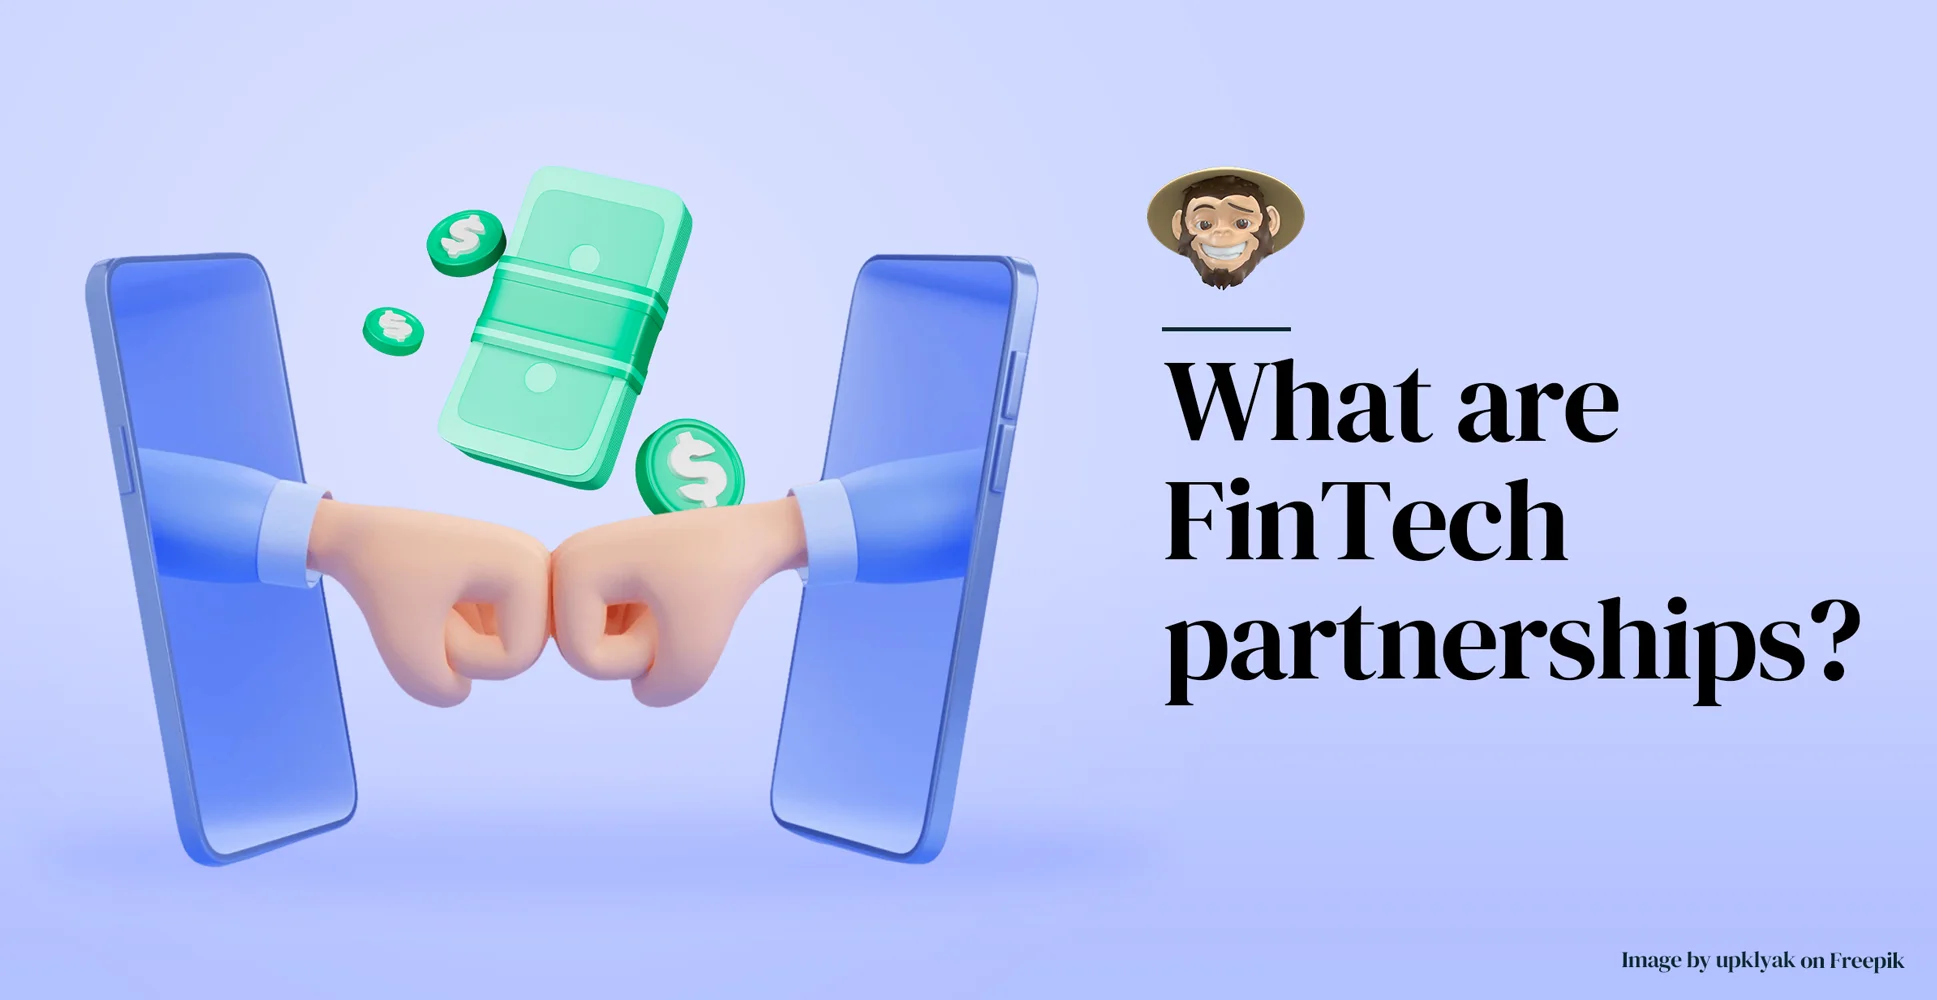 What are FinTech partnerships?